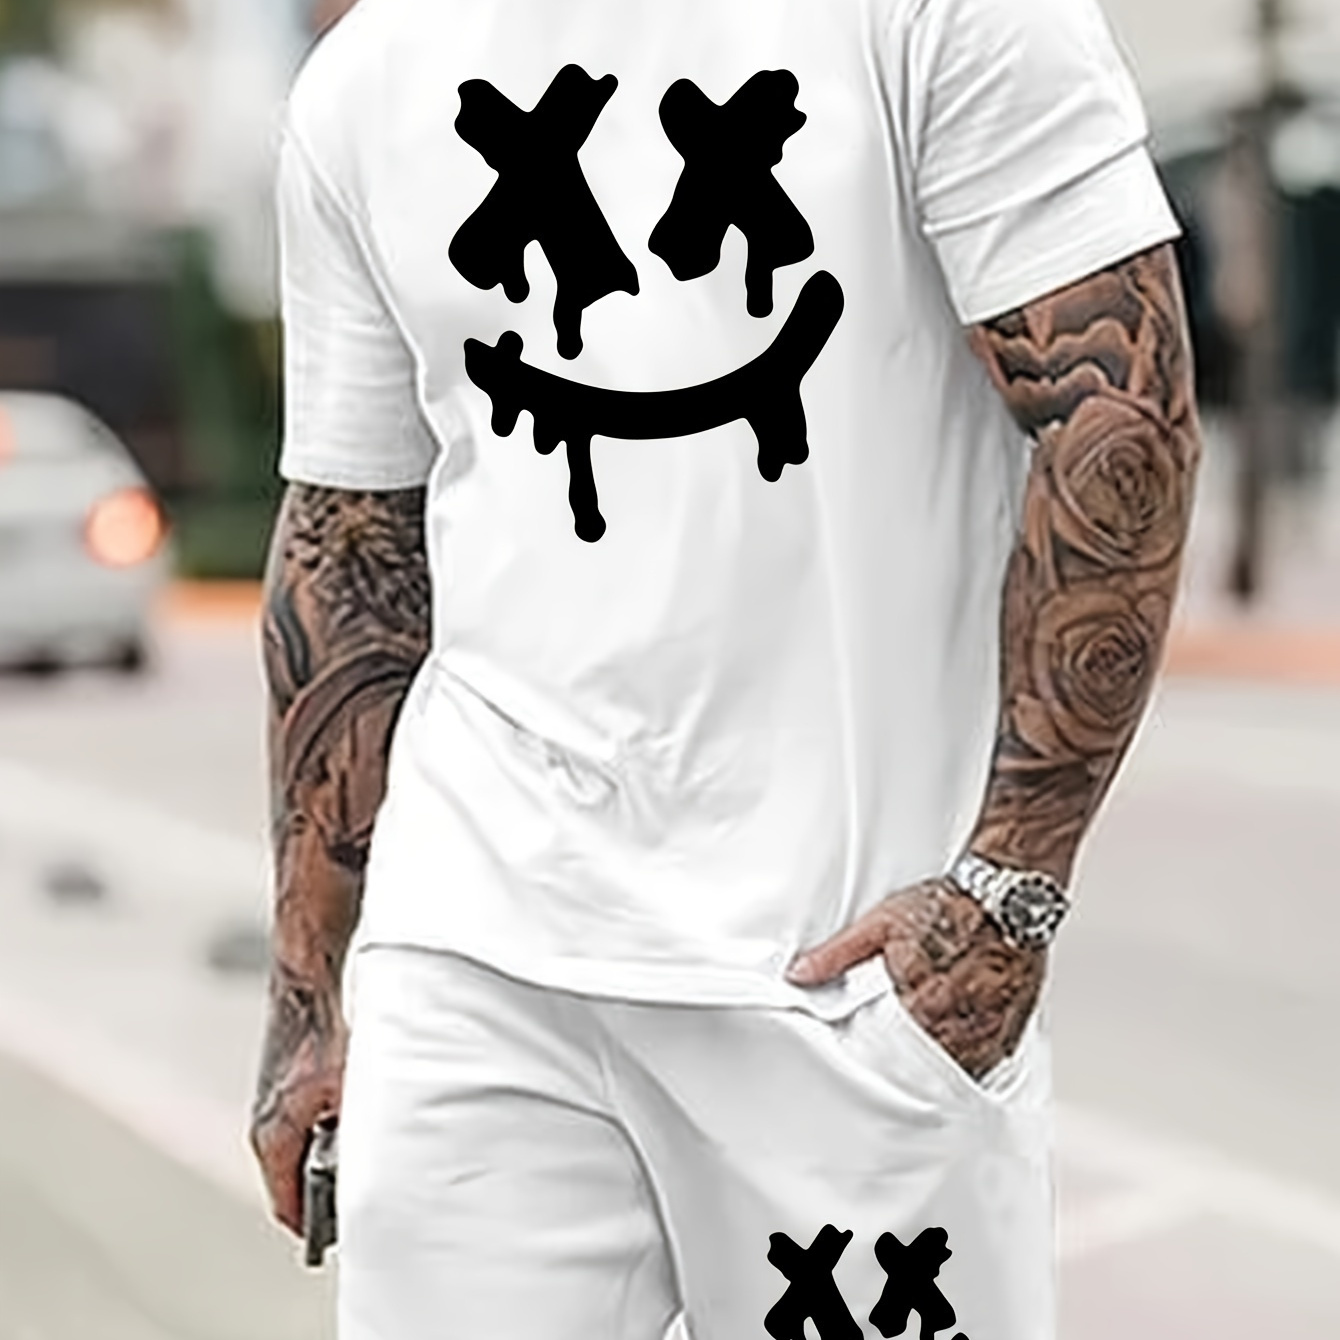 

Cross Eyes Smile Face Print, Men's 2pcs Outfits, Casual Crew Neck Short Sleeve T-shirt And Drawstring Shorts Set For Summer, Men's Clothing For Daily Vacation Resorts